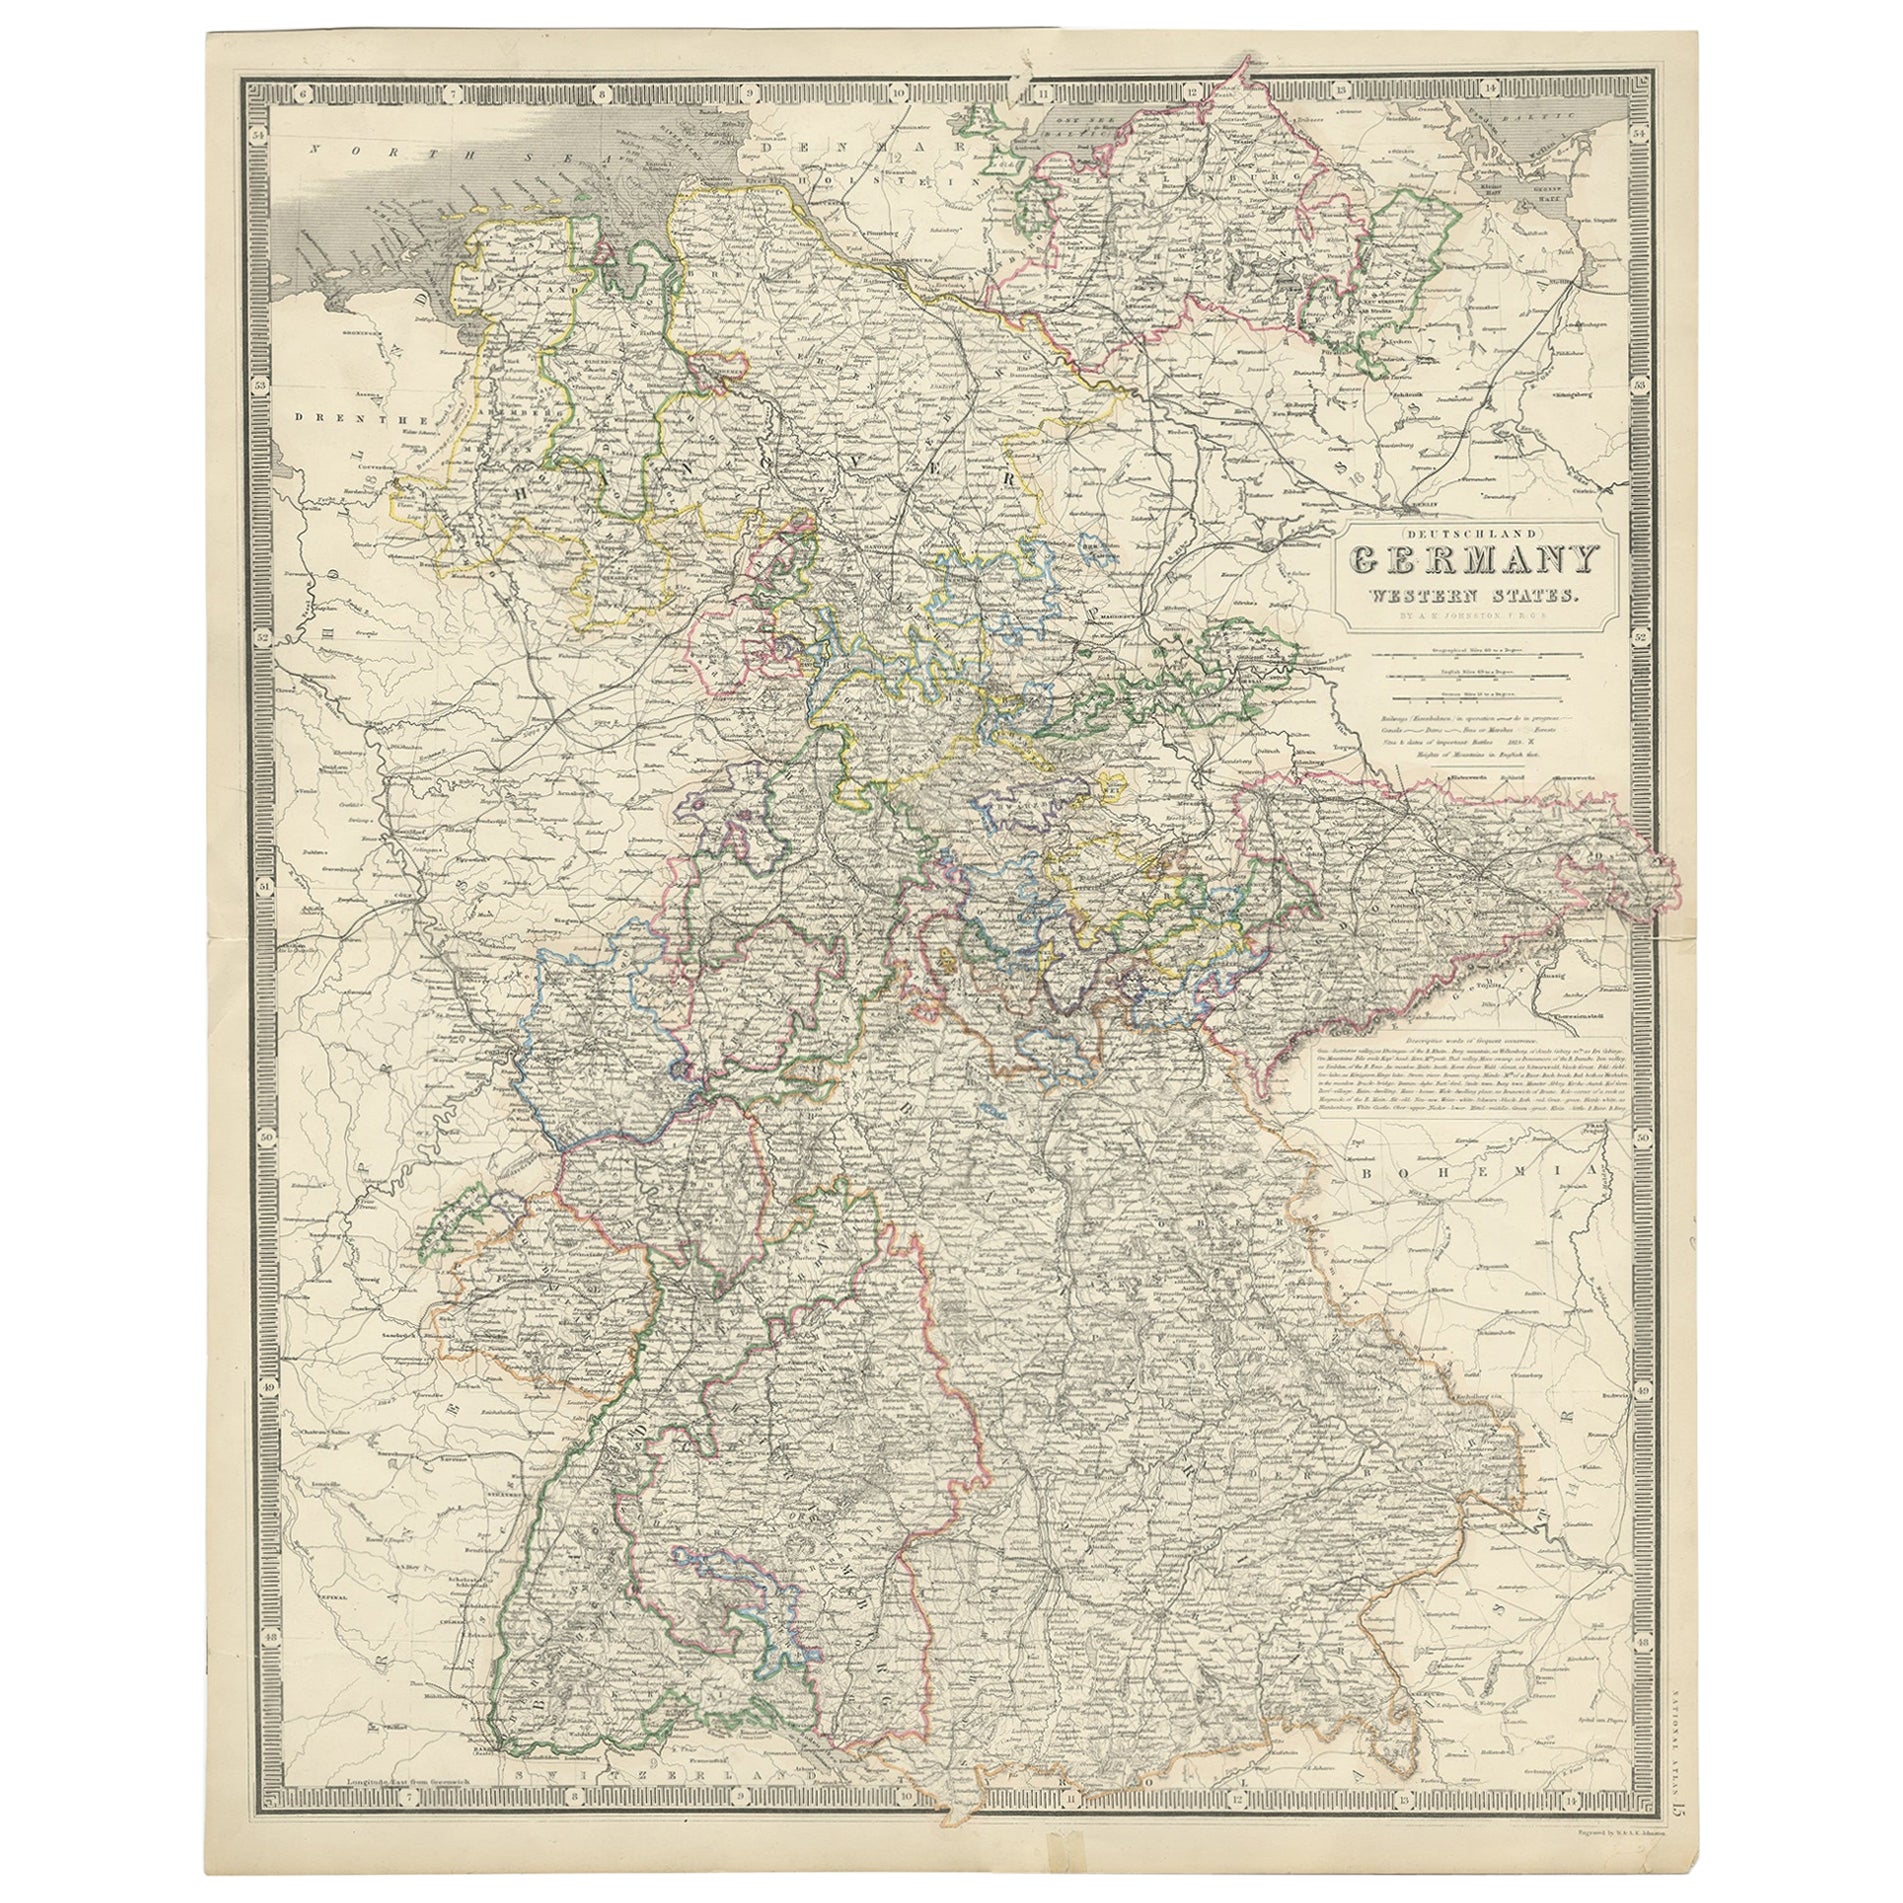 Map of West Germany Incl Regions Wurtemberg, Bavaria, Hanover, Etc, c.1850 For Sale